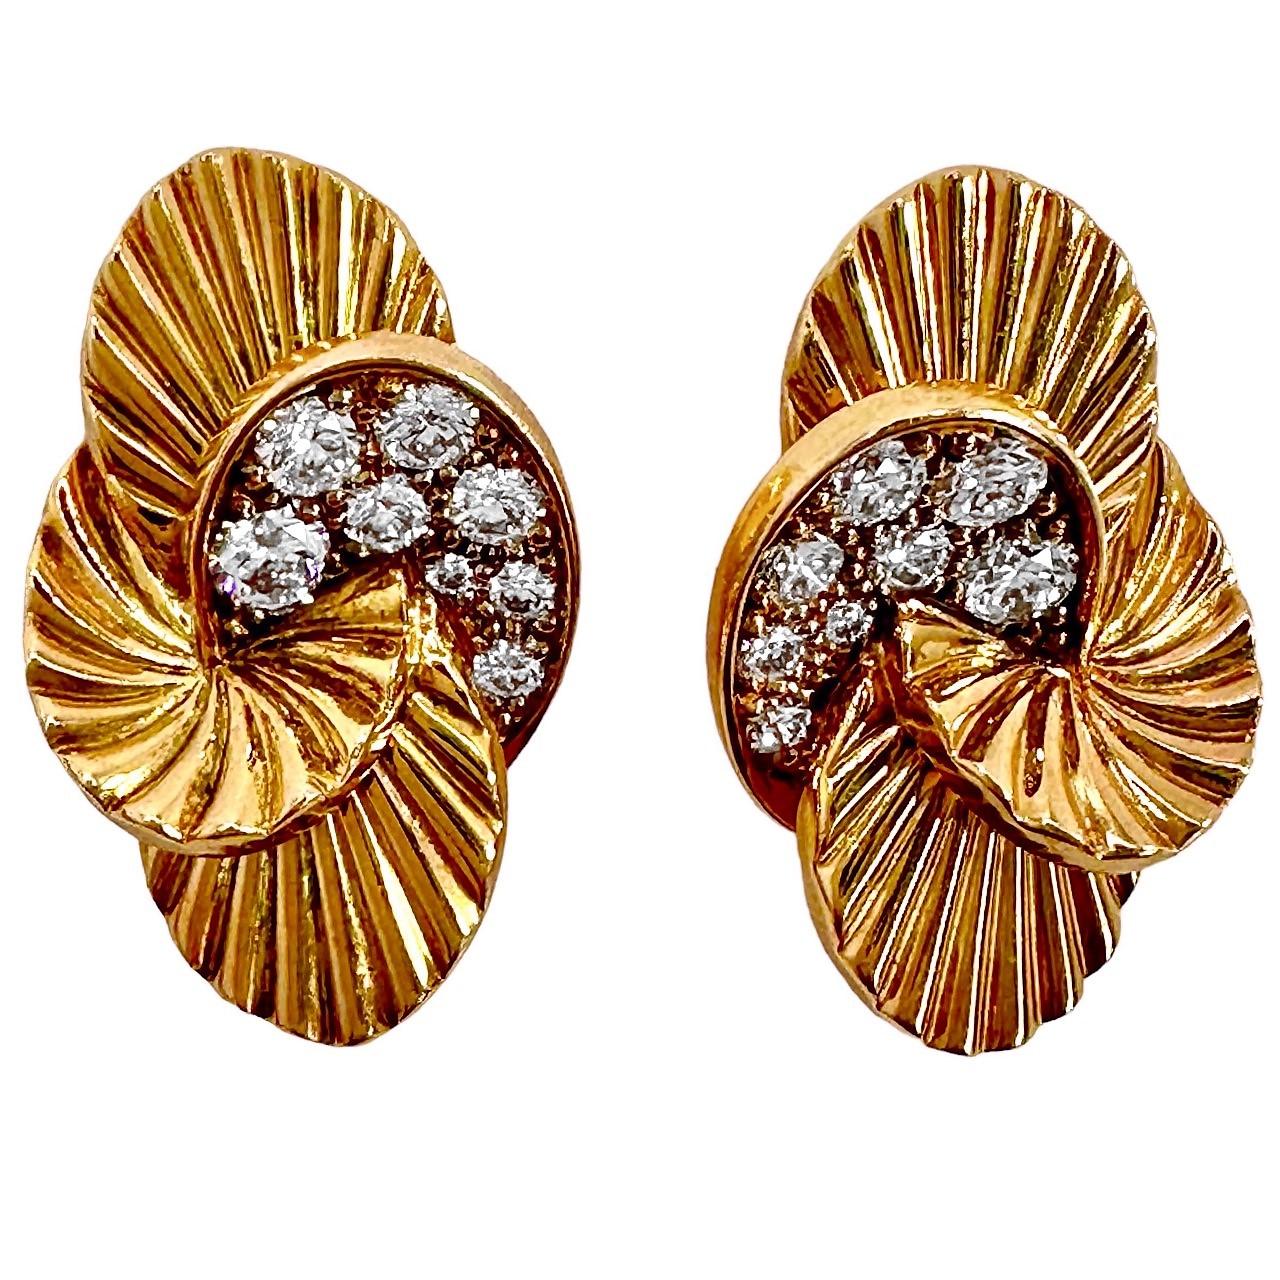 This demure pair of oval shaped, pink gold, French Cartier earrings are precisely crafted pin wheel panels that are set with sixteen brilliant cut diamonds weighing an approximate .65ct total of overall F color and VS1 clarity. They are petite in